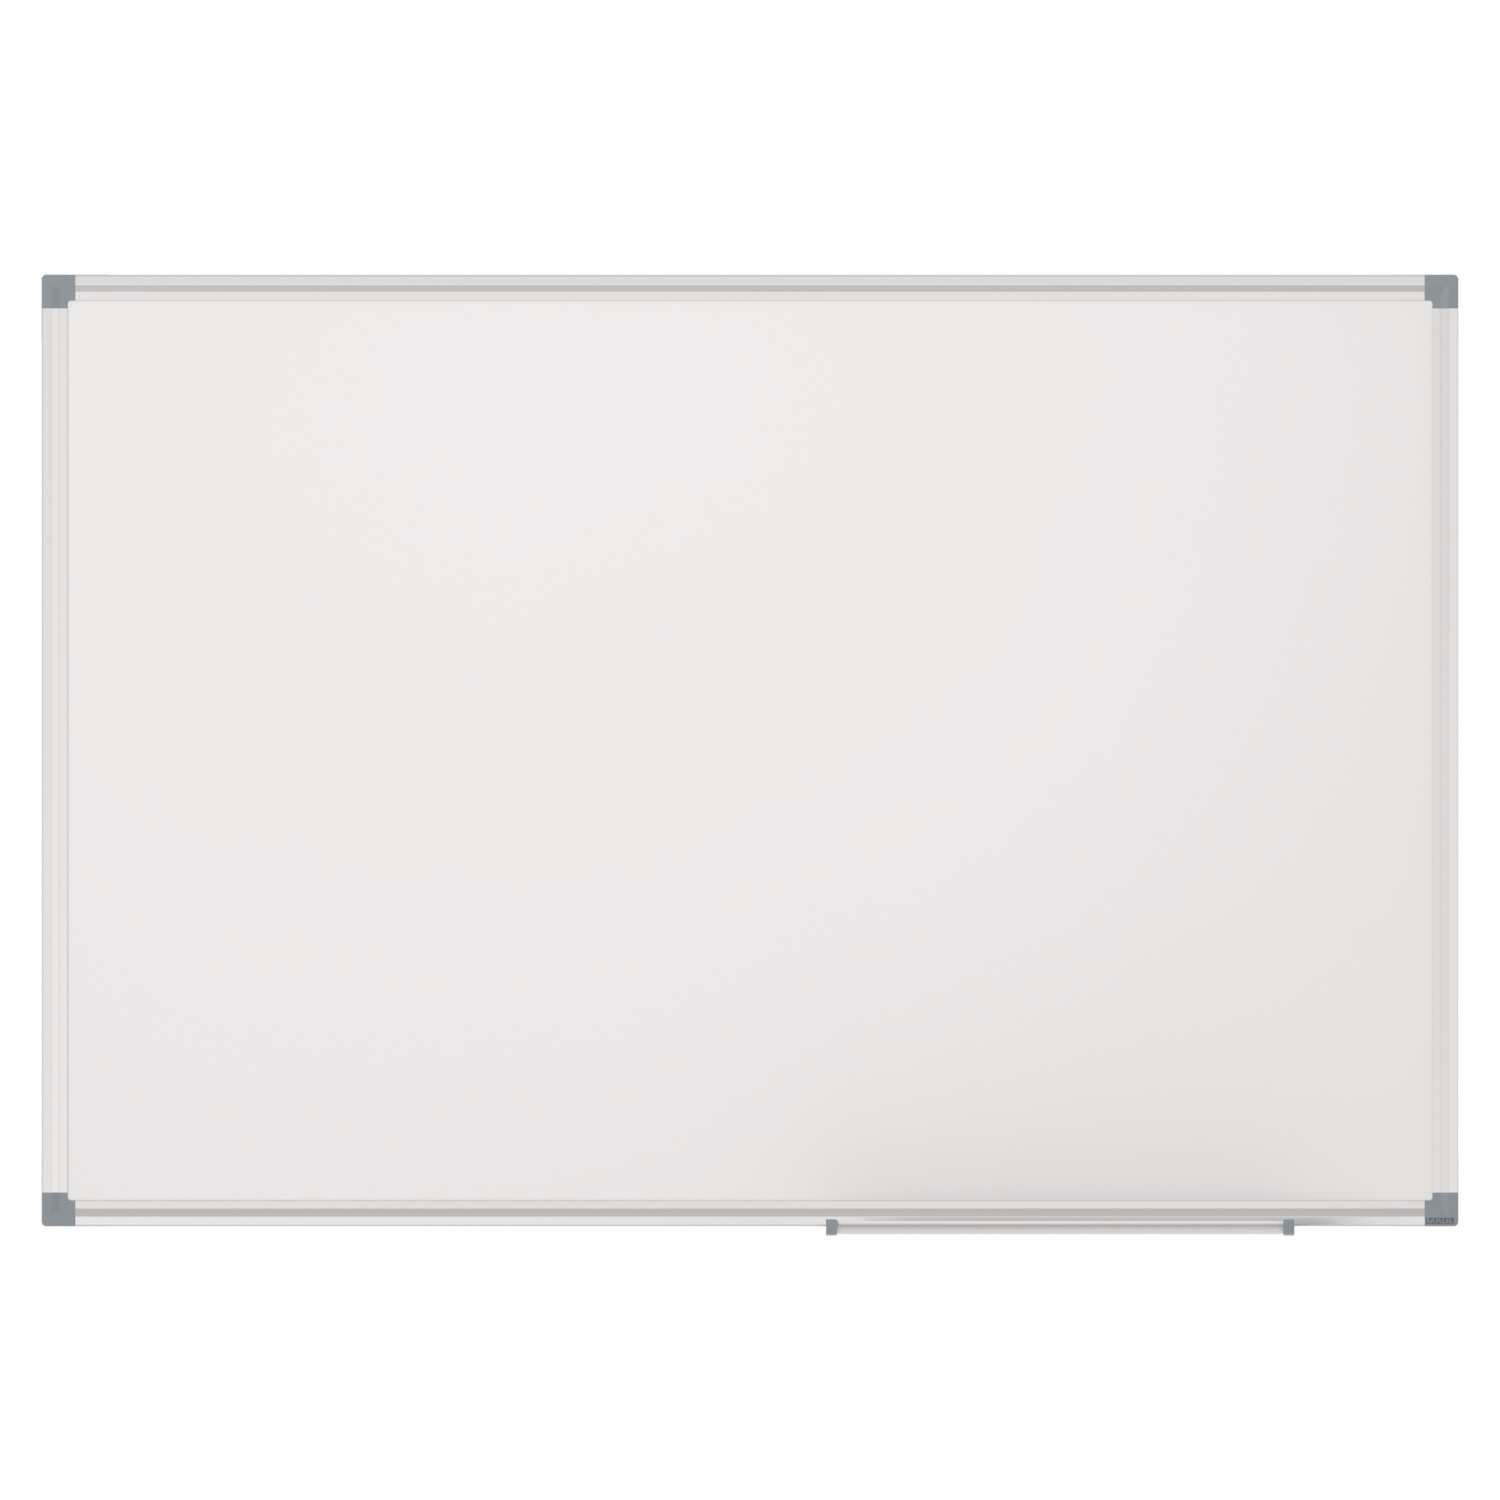 Whiteboard MAULstandard, Emaille, 45x60 cm